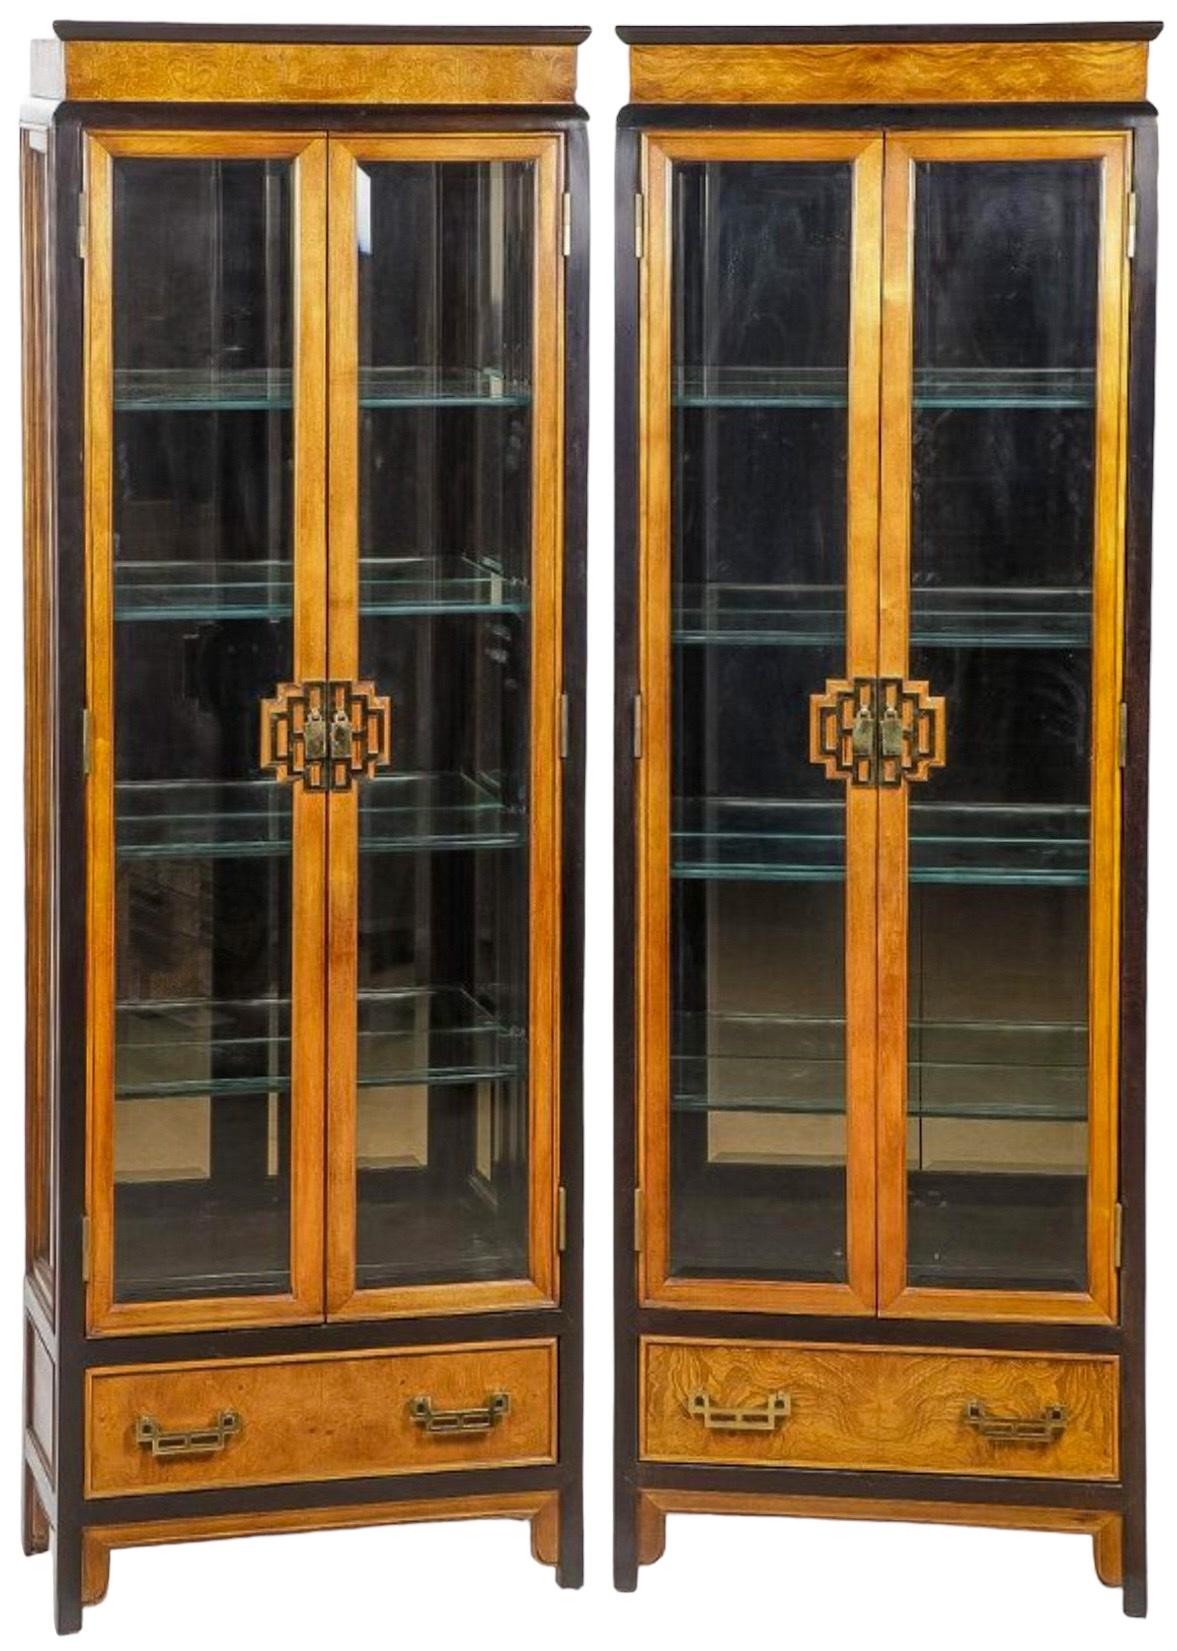 James Mont Asian Modern Style Burl & Brass Vitrines / Display Cabinets - Pair 3